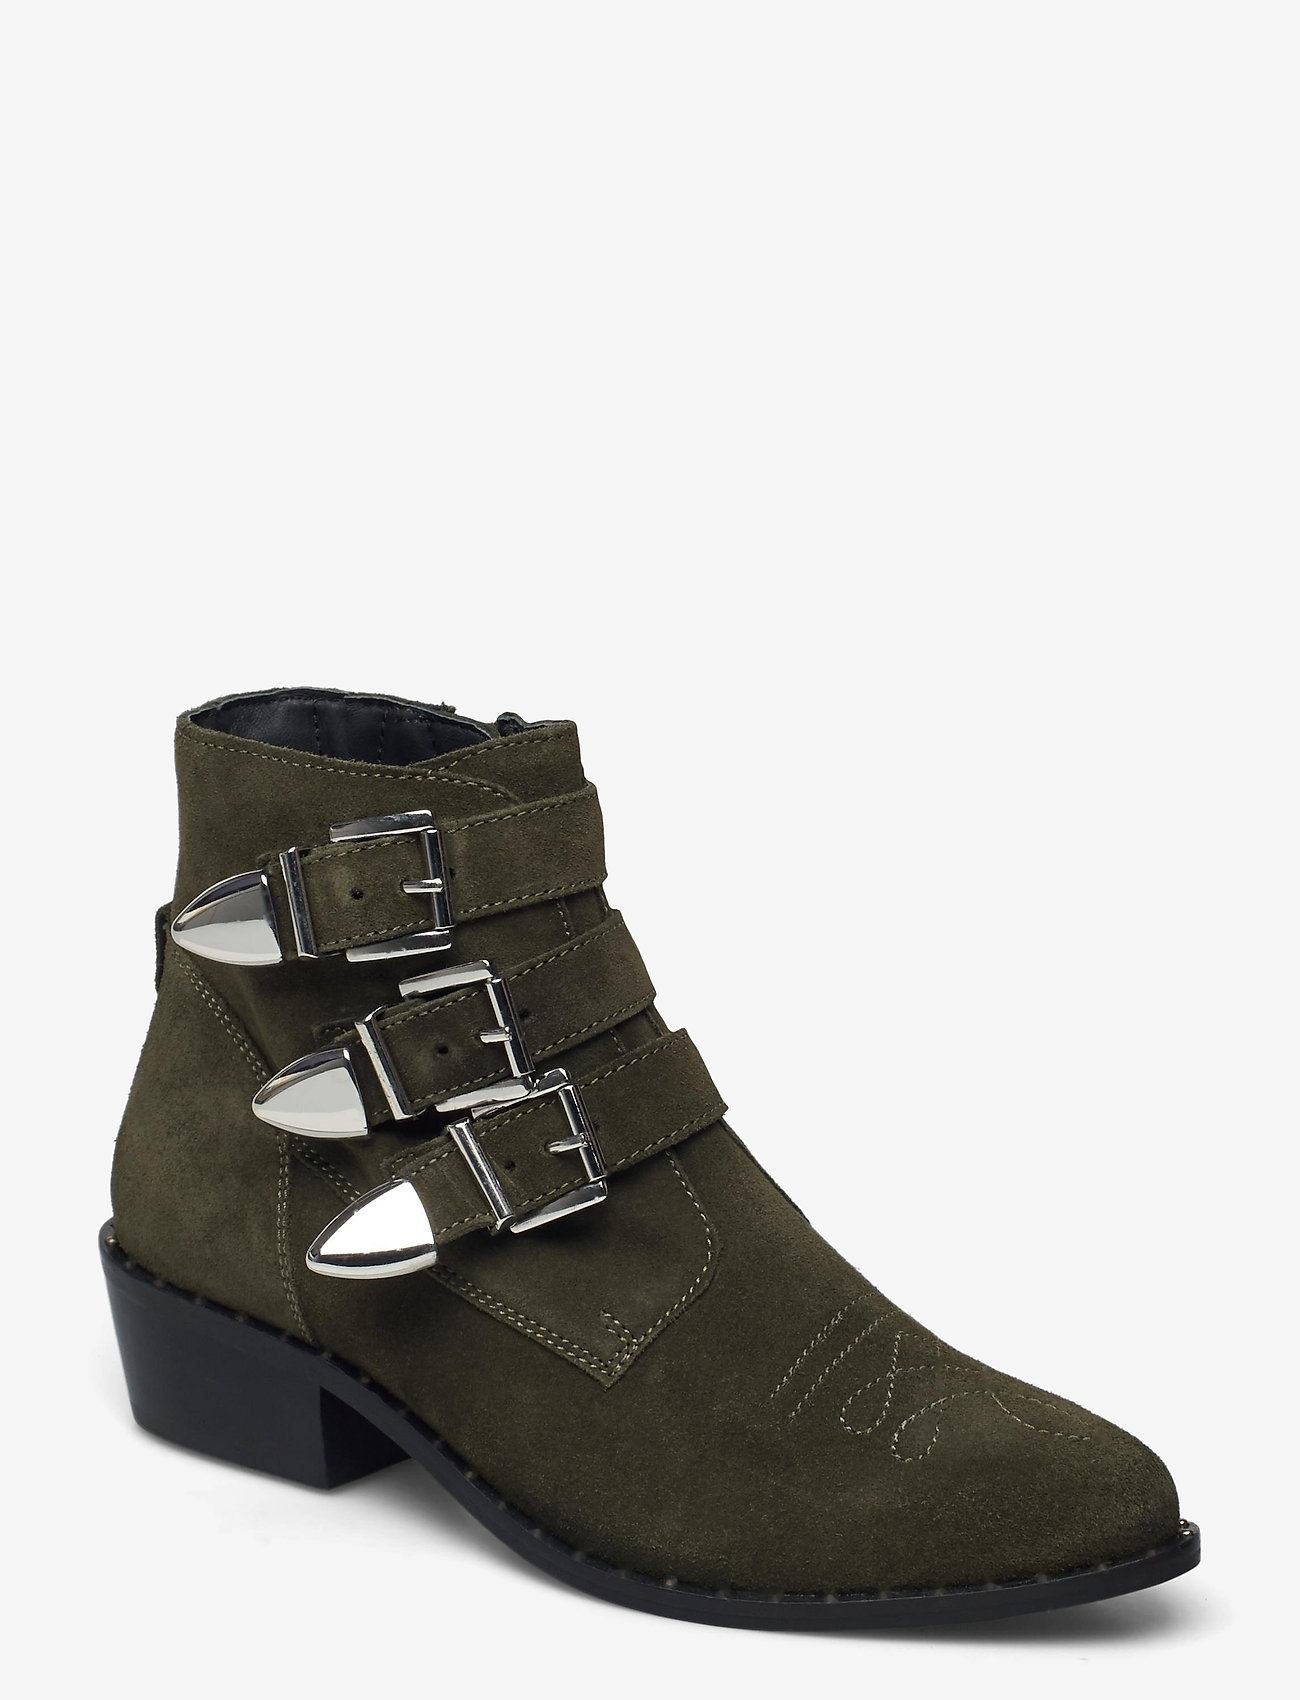 Mexx - Boot - flat ankle boots - olive - 0